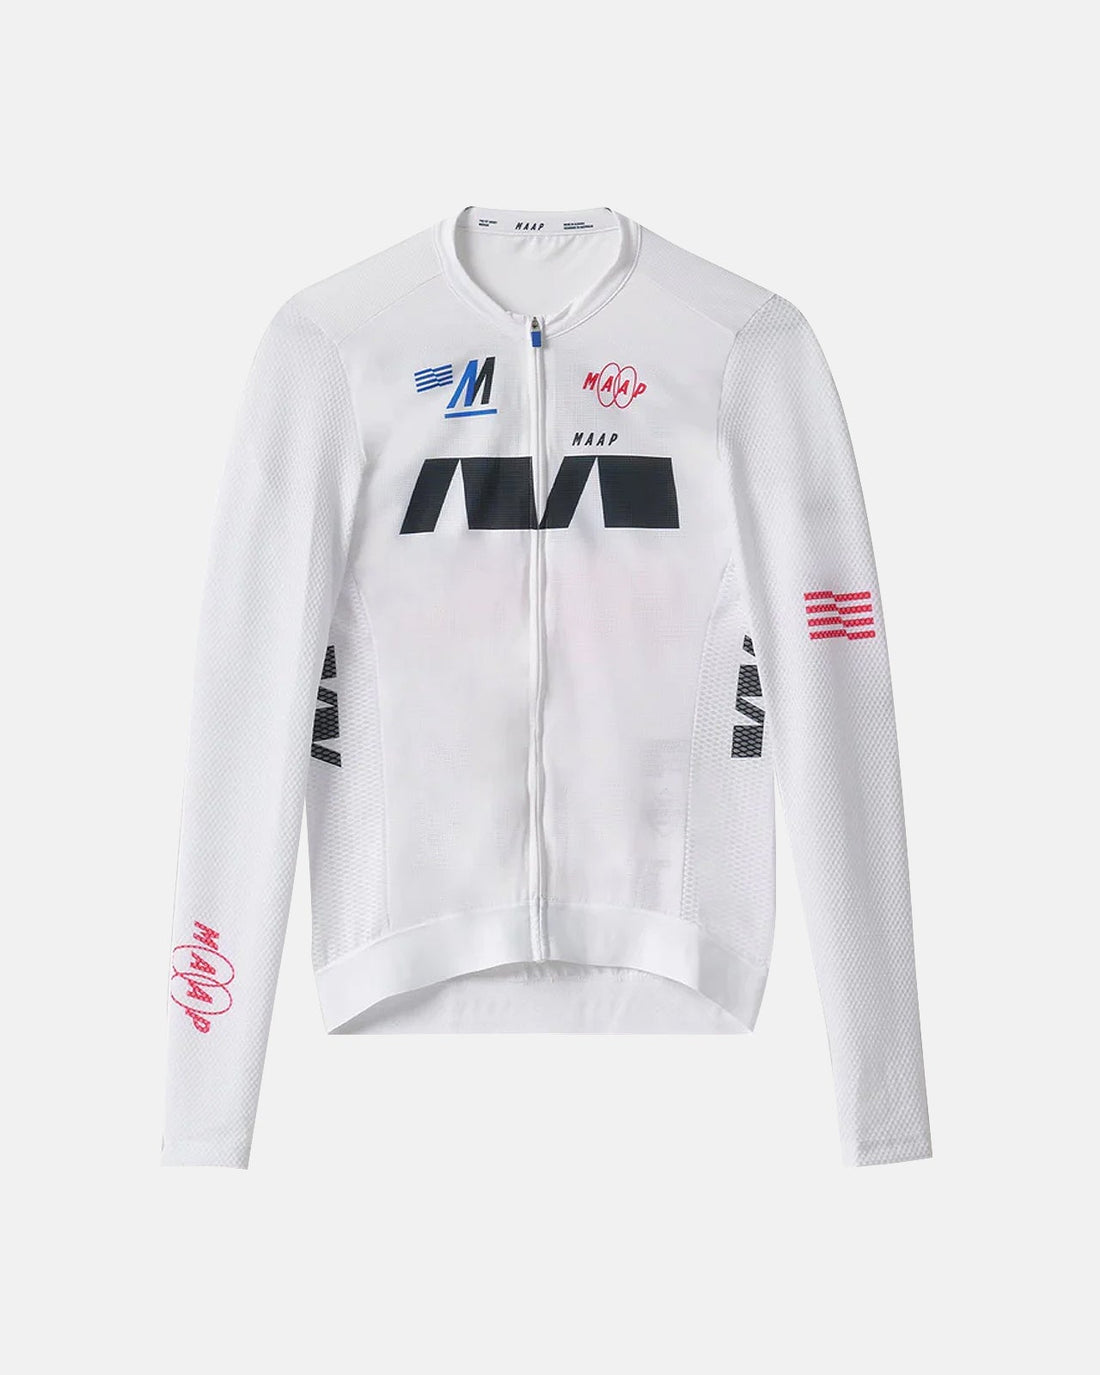 MAAP Trace Pro Air LS Jersey - White